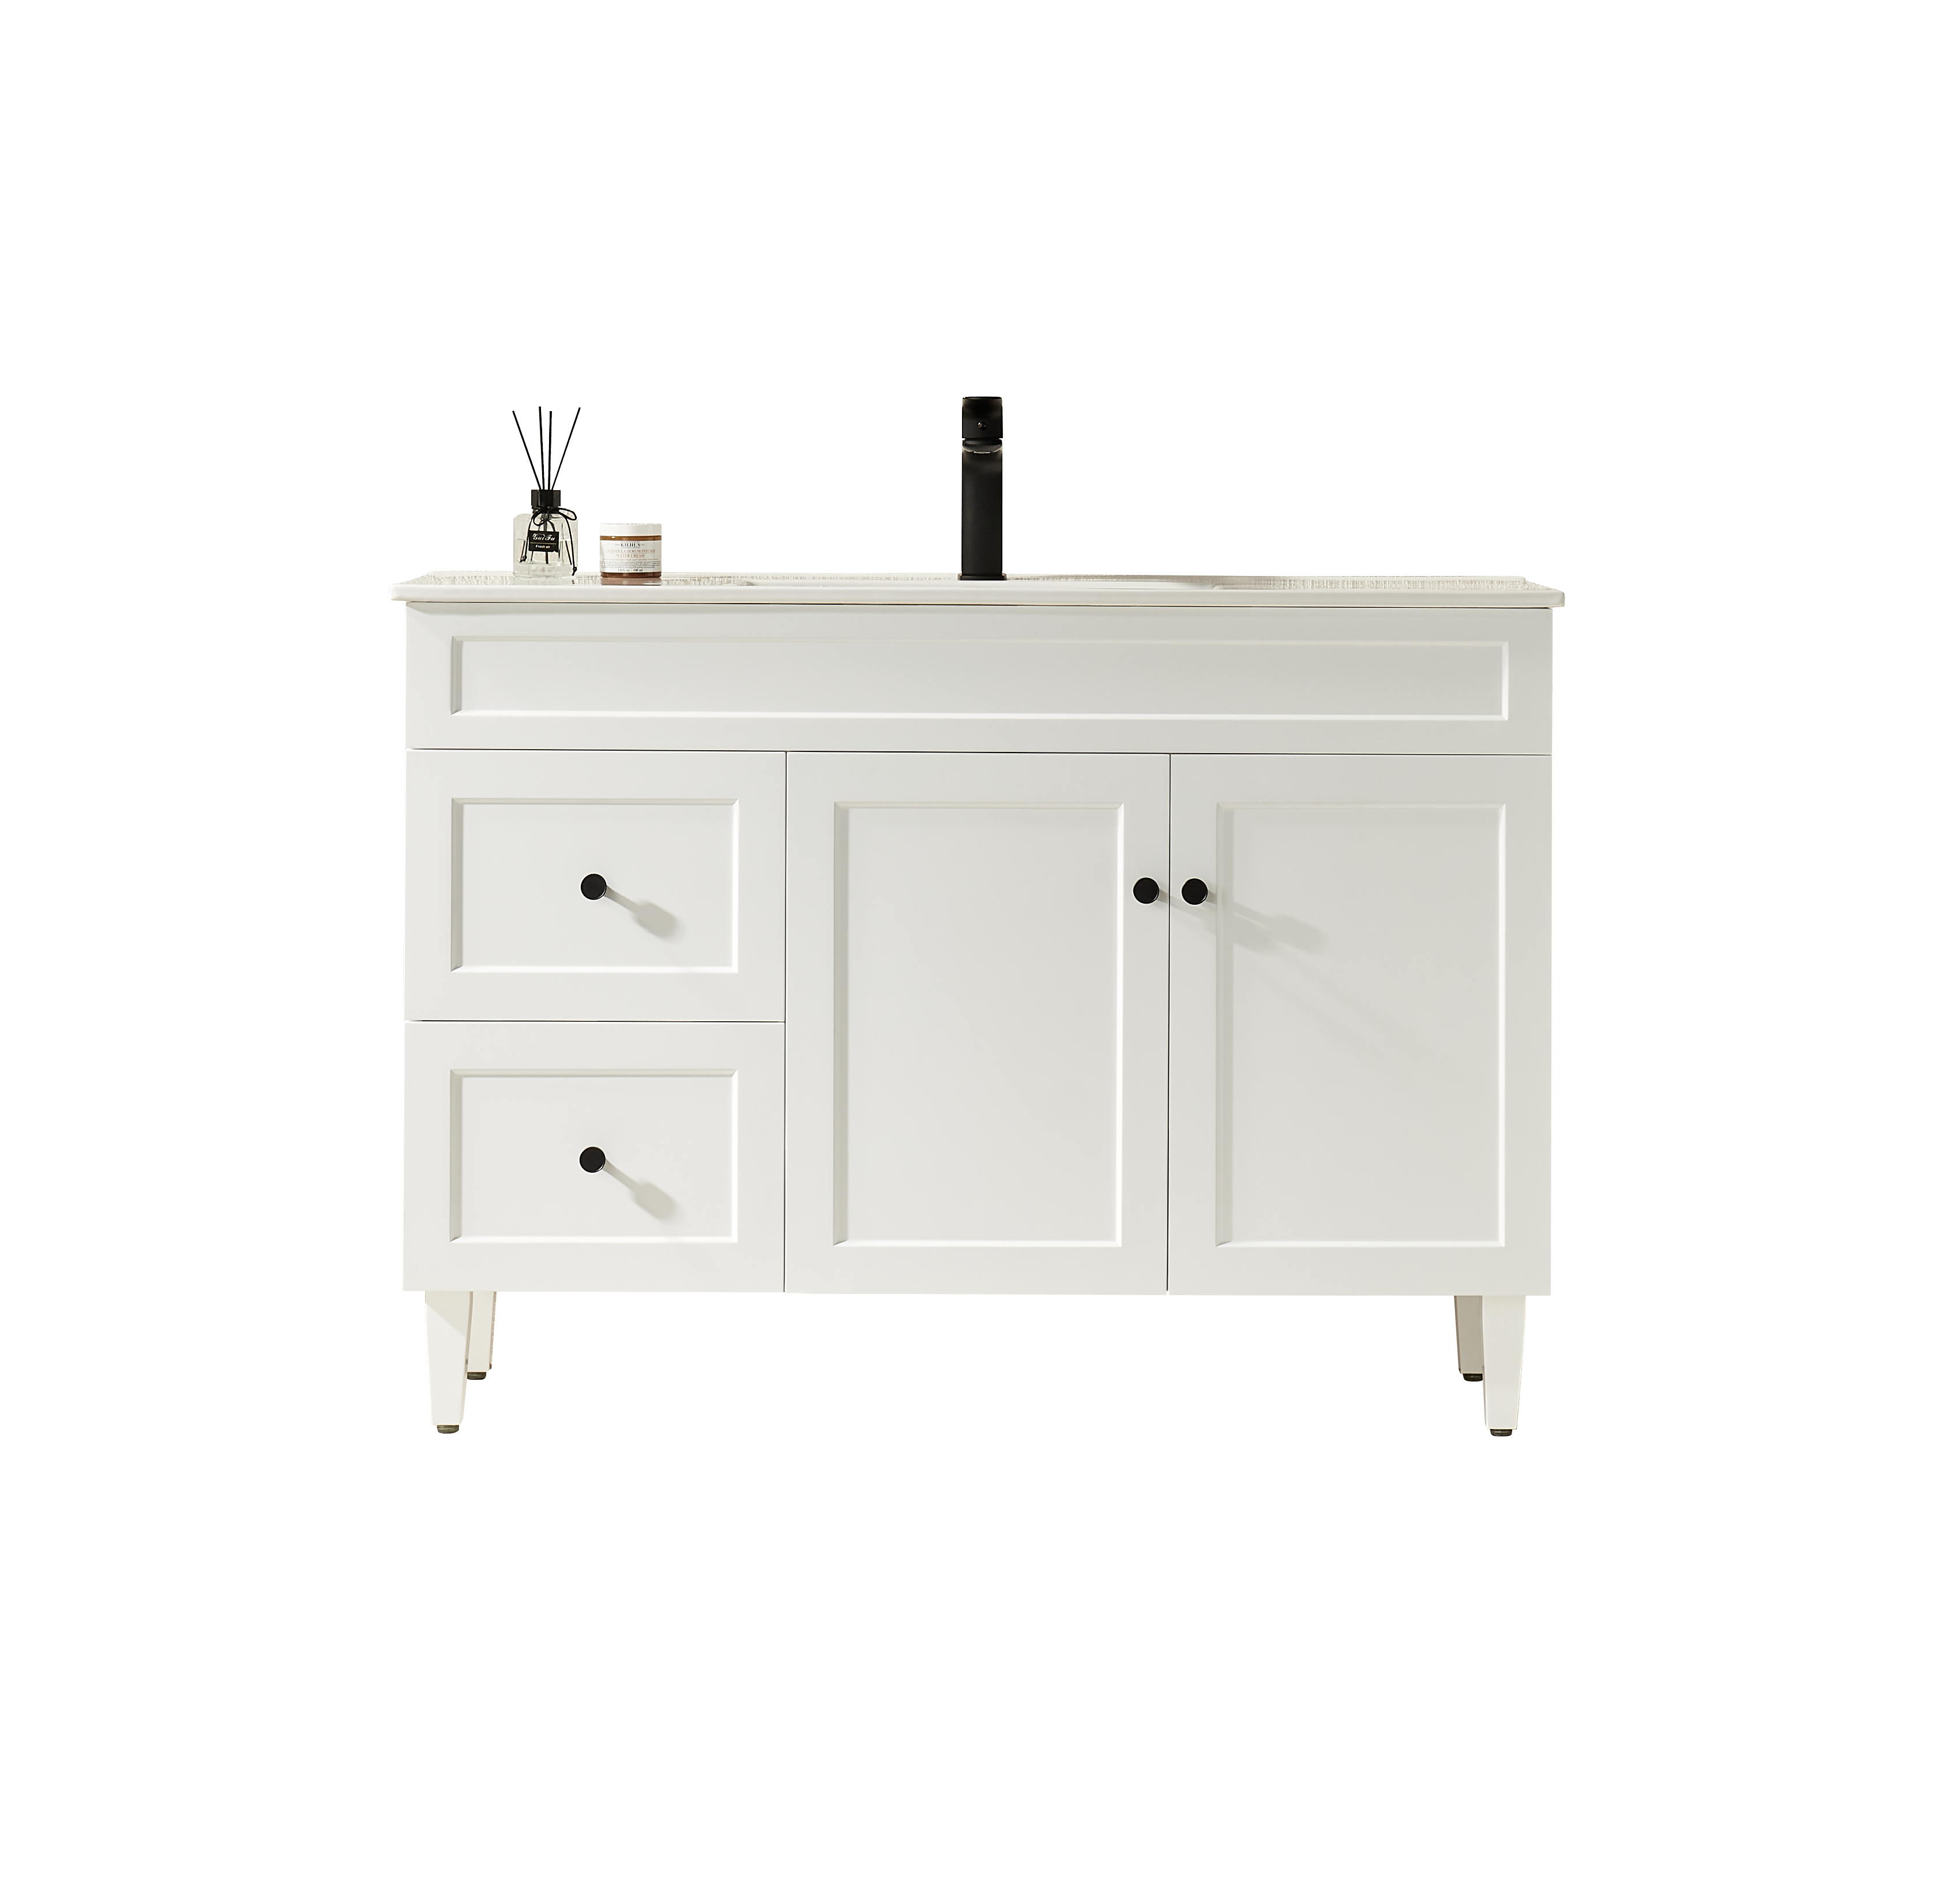 CETO HARRINGTON MATTE WHITE 1200MM SINGLE BOWL FLOOR STANDING VANITY (AVAILABLE IN LEFT AND RIGHT HAND DRAWER)